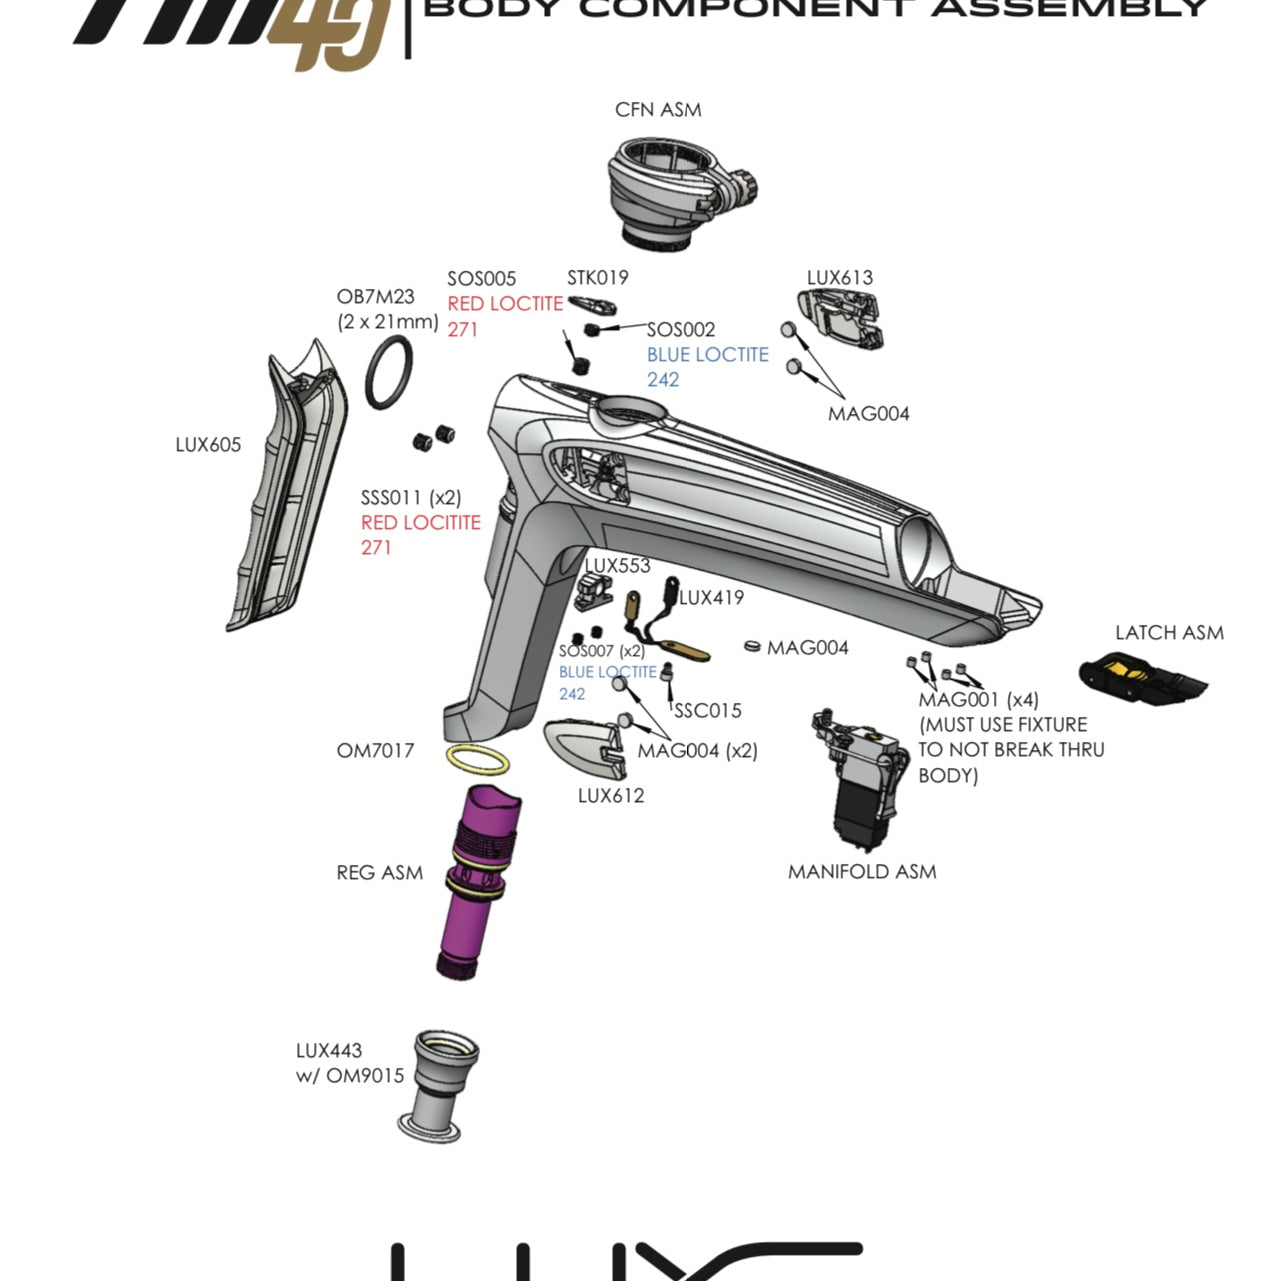 DLX Luxe TM40 Body Component System Parts Picker - Pick the Part You Need!